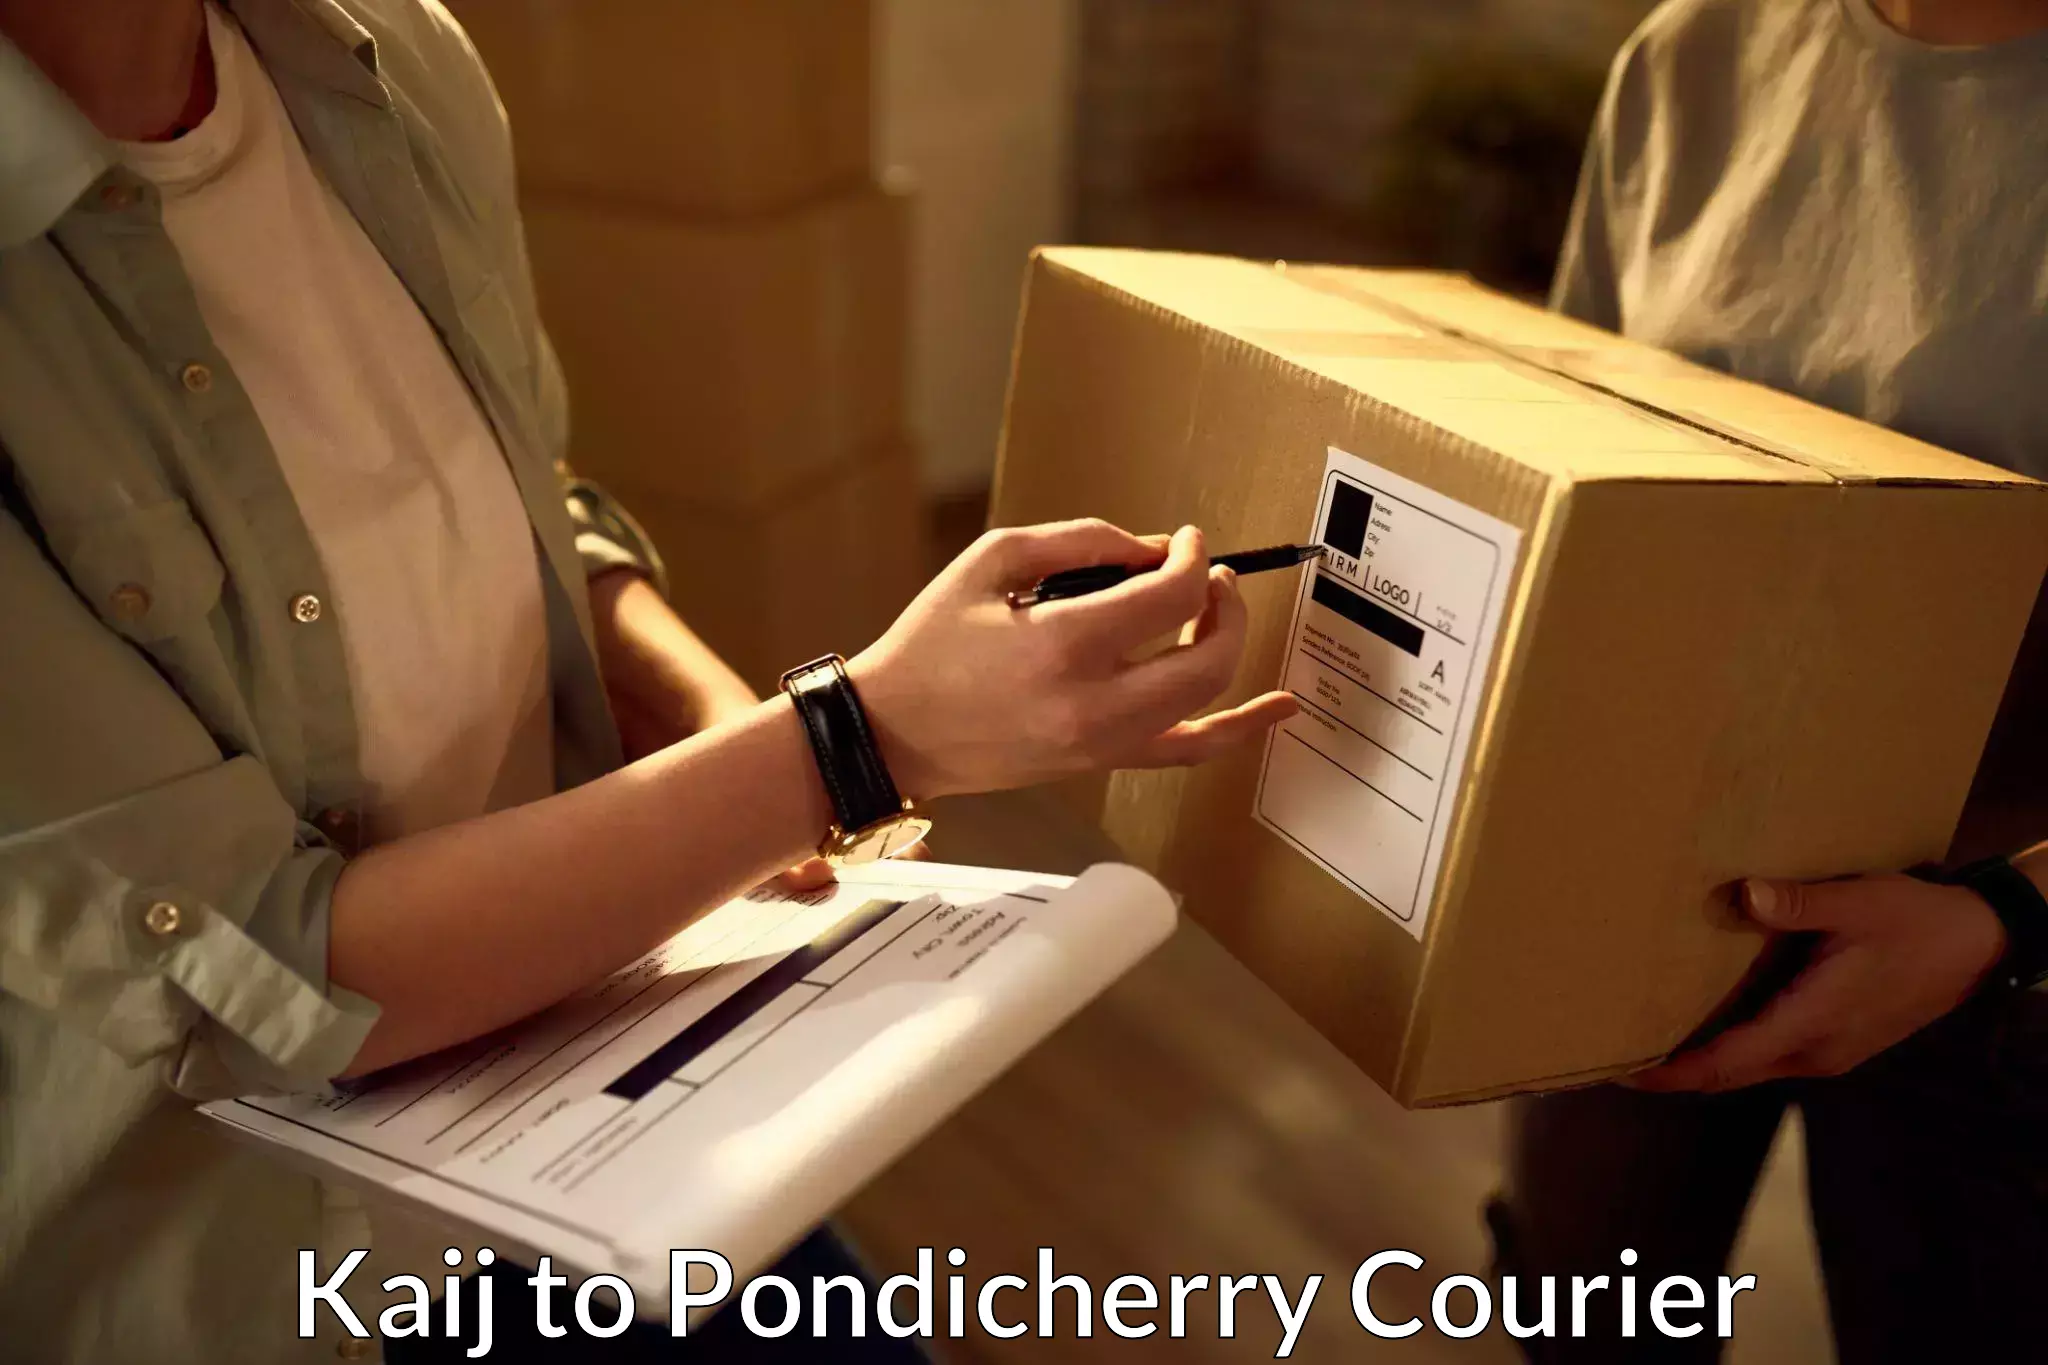 Next-day delivery options in Kaij to Pondicherry